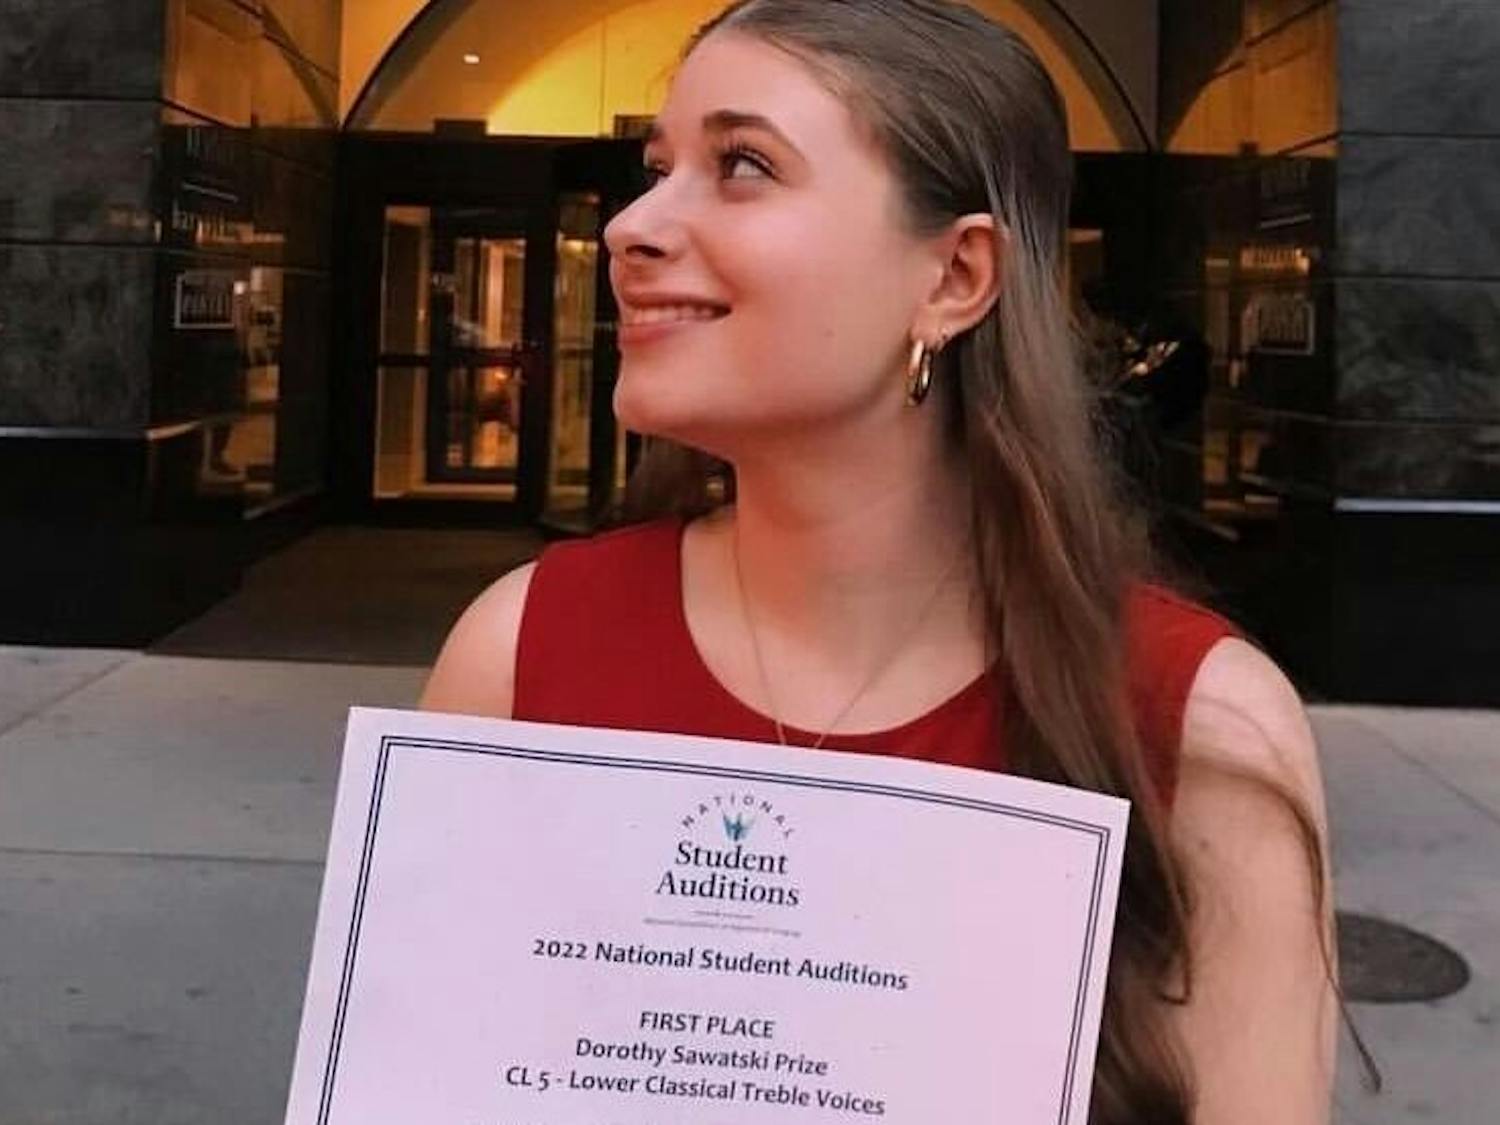 Isabelle Kosempa won first place in the Lower Classical Treble Voices division at the NATS competition on July 2, 2022. Photo courtesy of Kosempa.